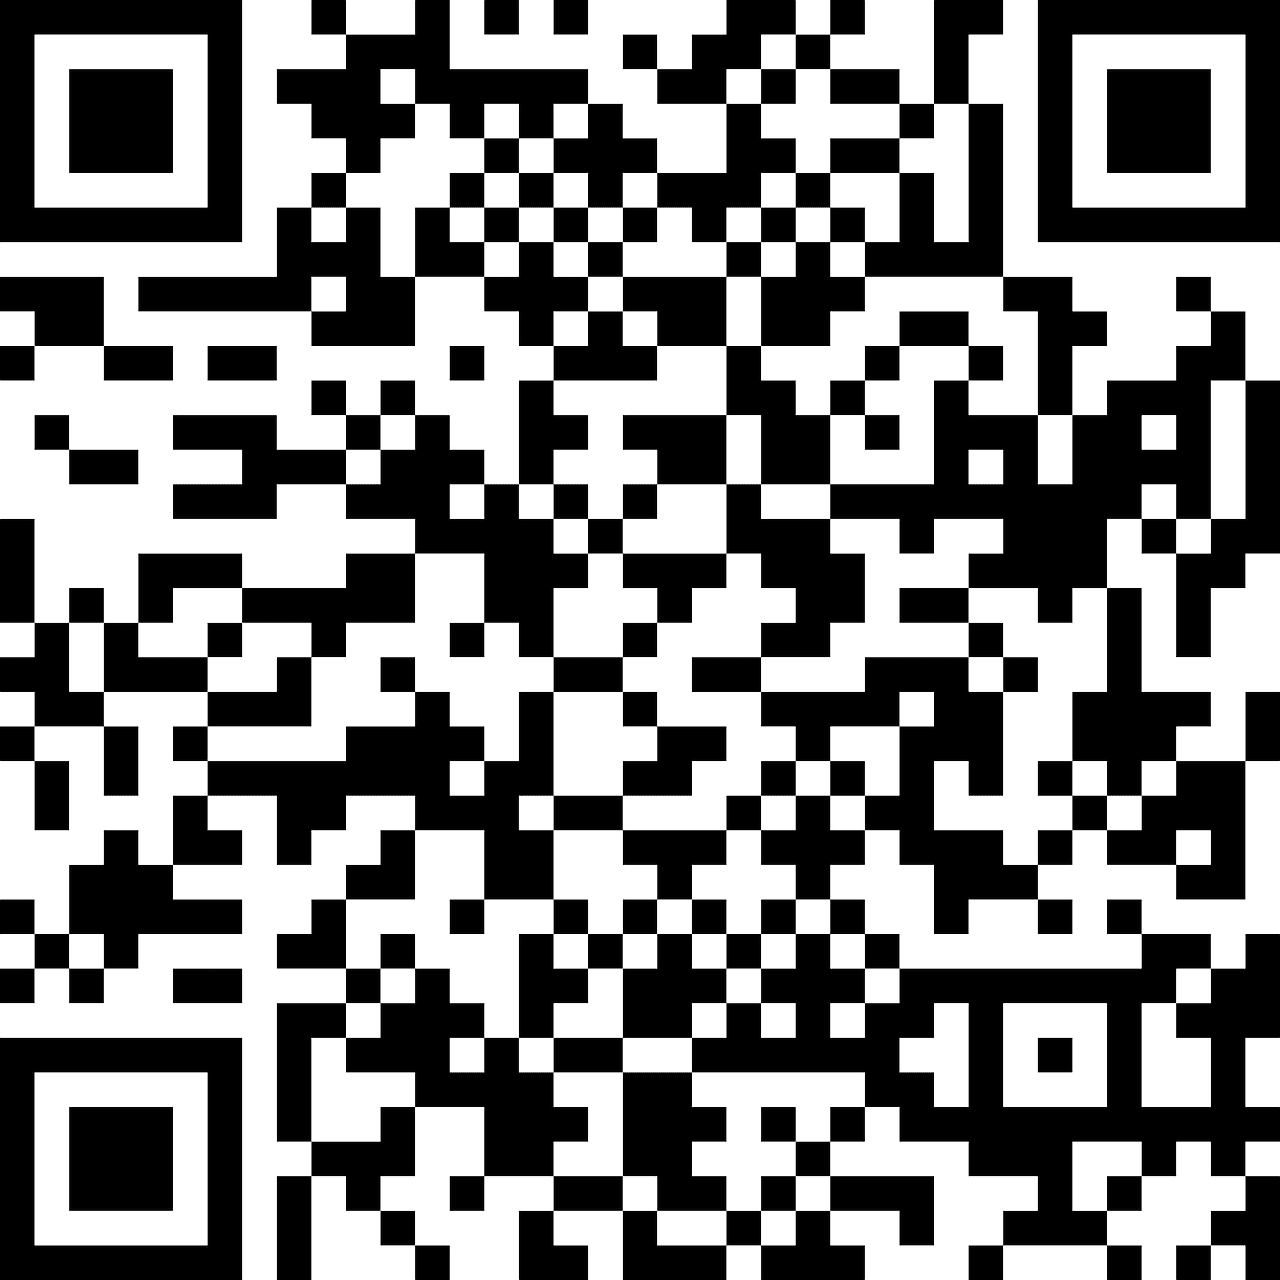 Scan to Use A QR Code